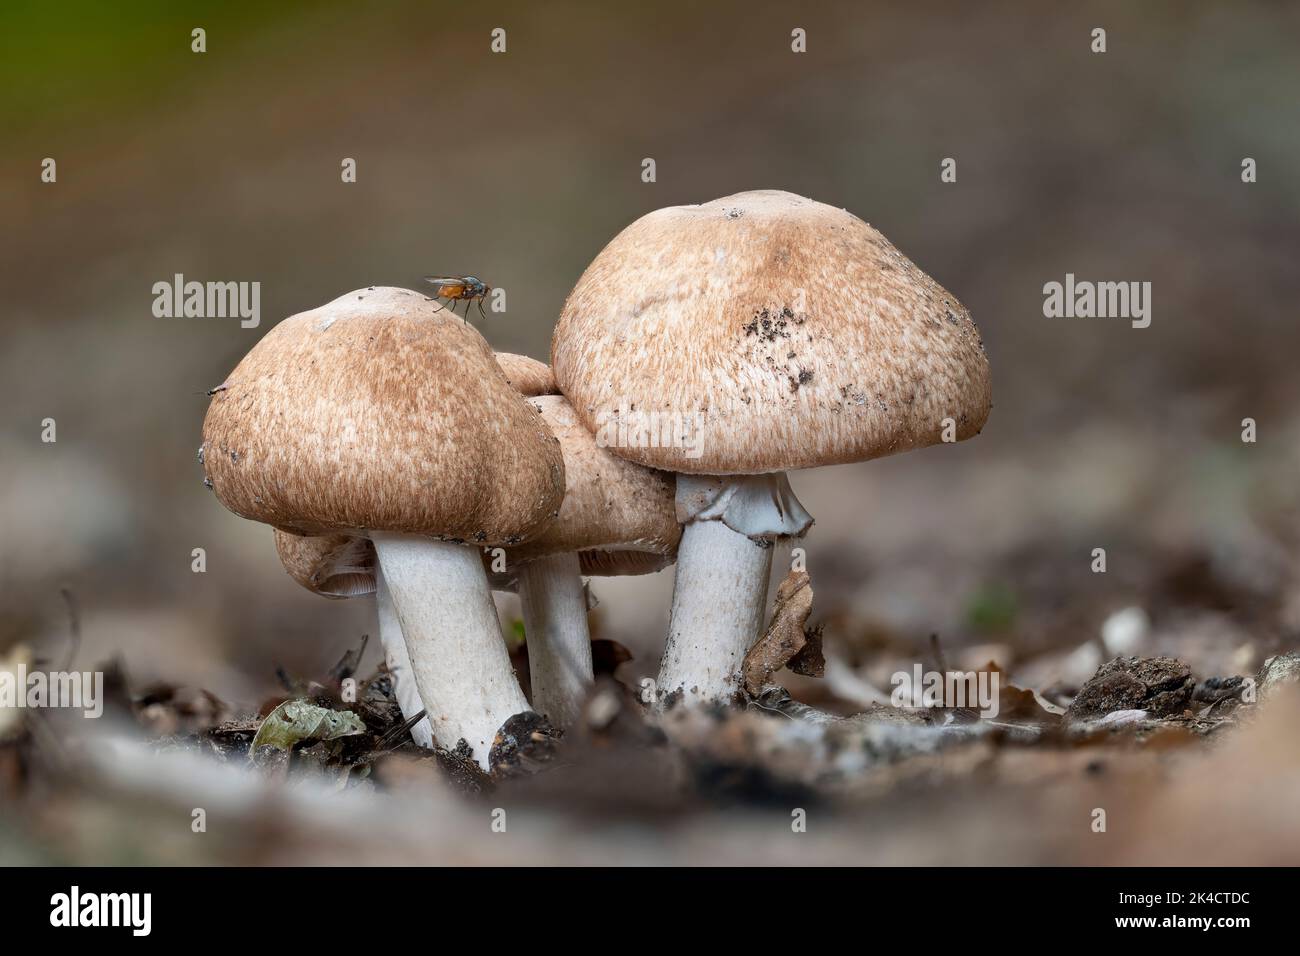 A group of scaly wood mushrooms (Agaricus silvaticus) in september Stock Photo